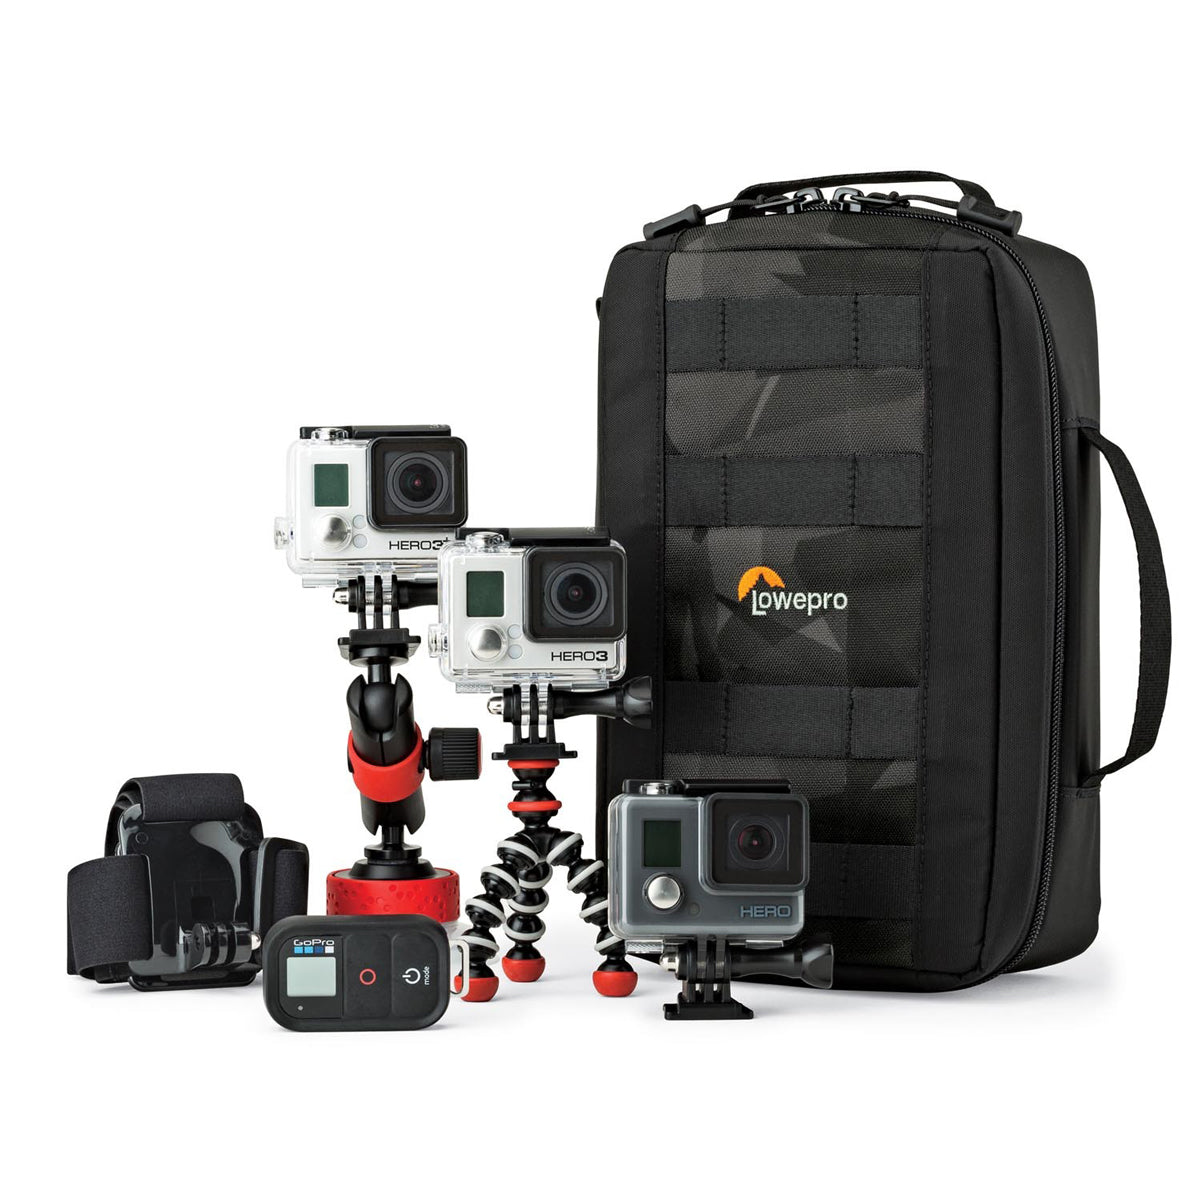 Lowepro Viewpoint CS 80 Case for Action Cameras (Black)